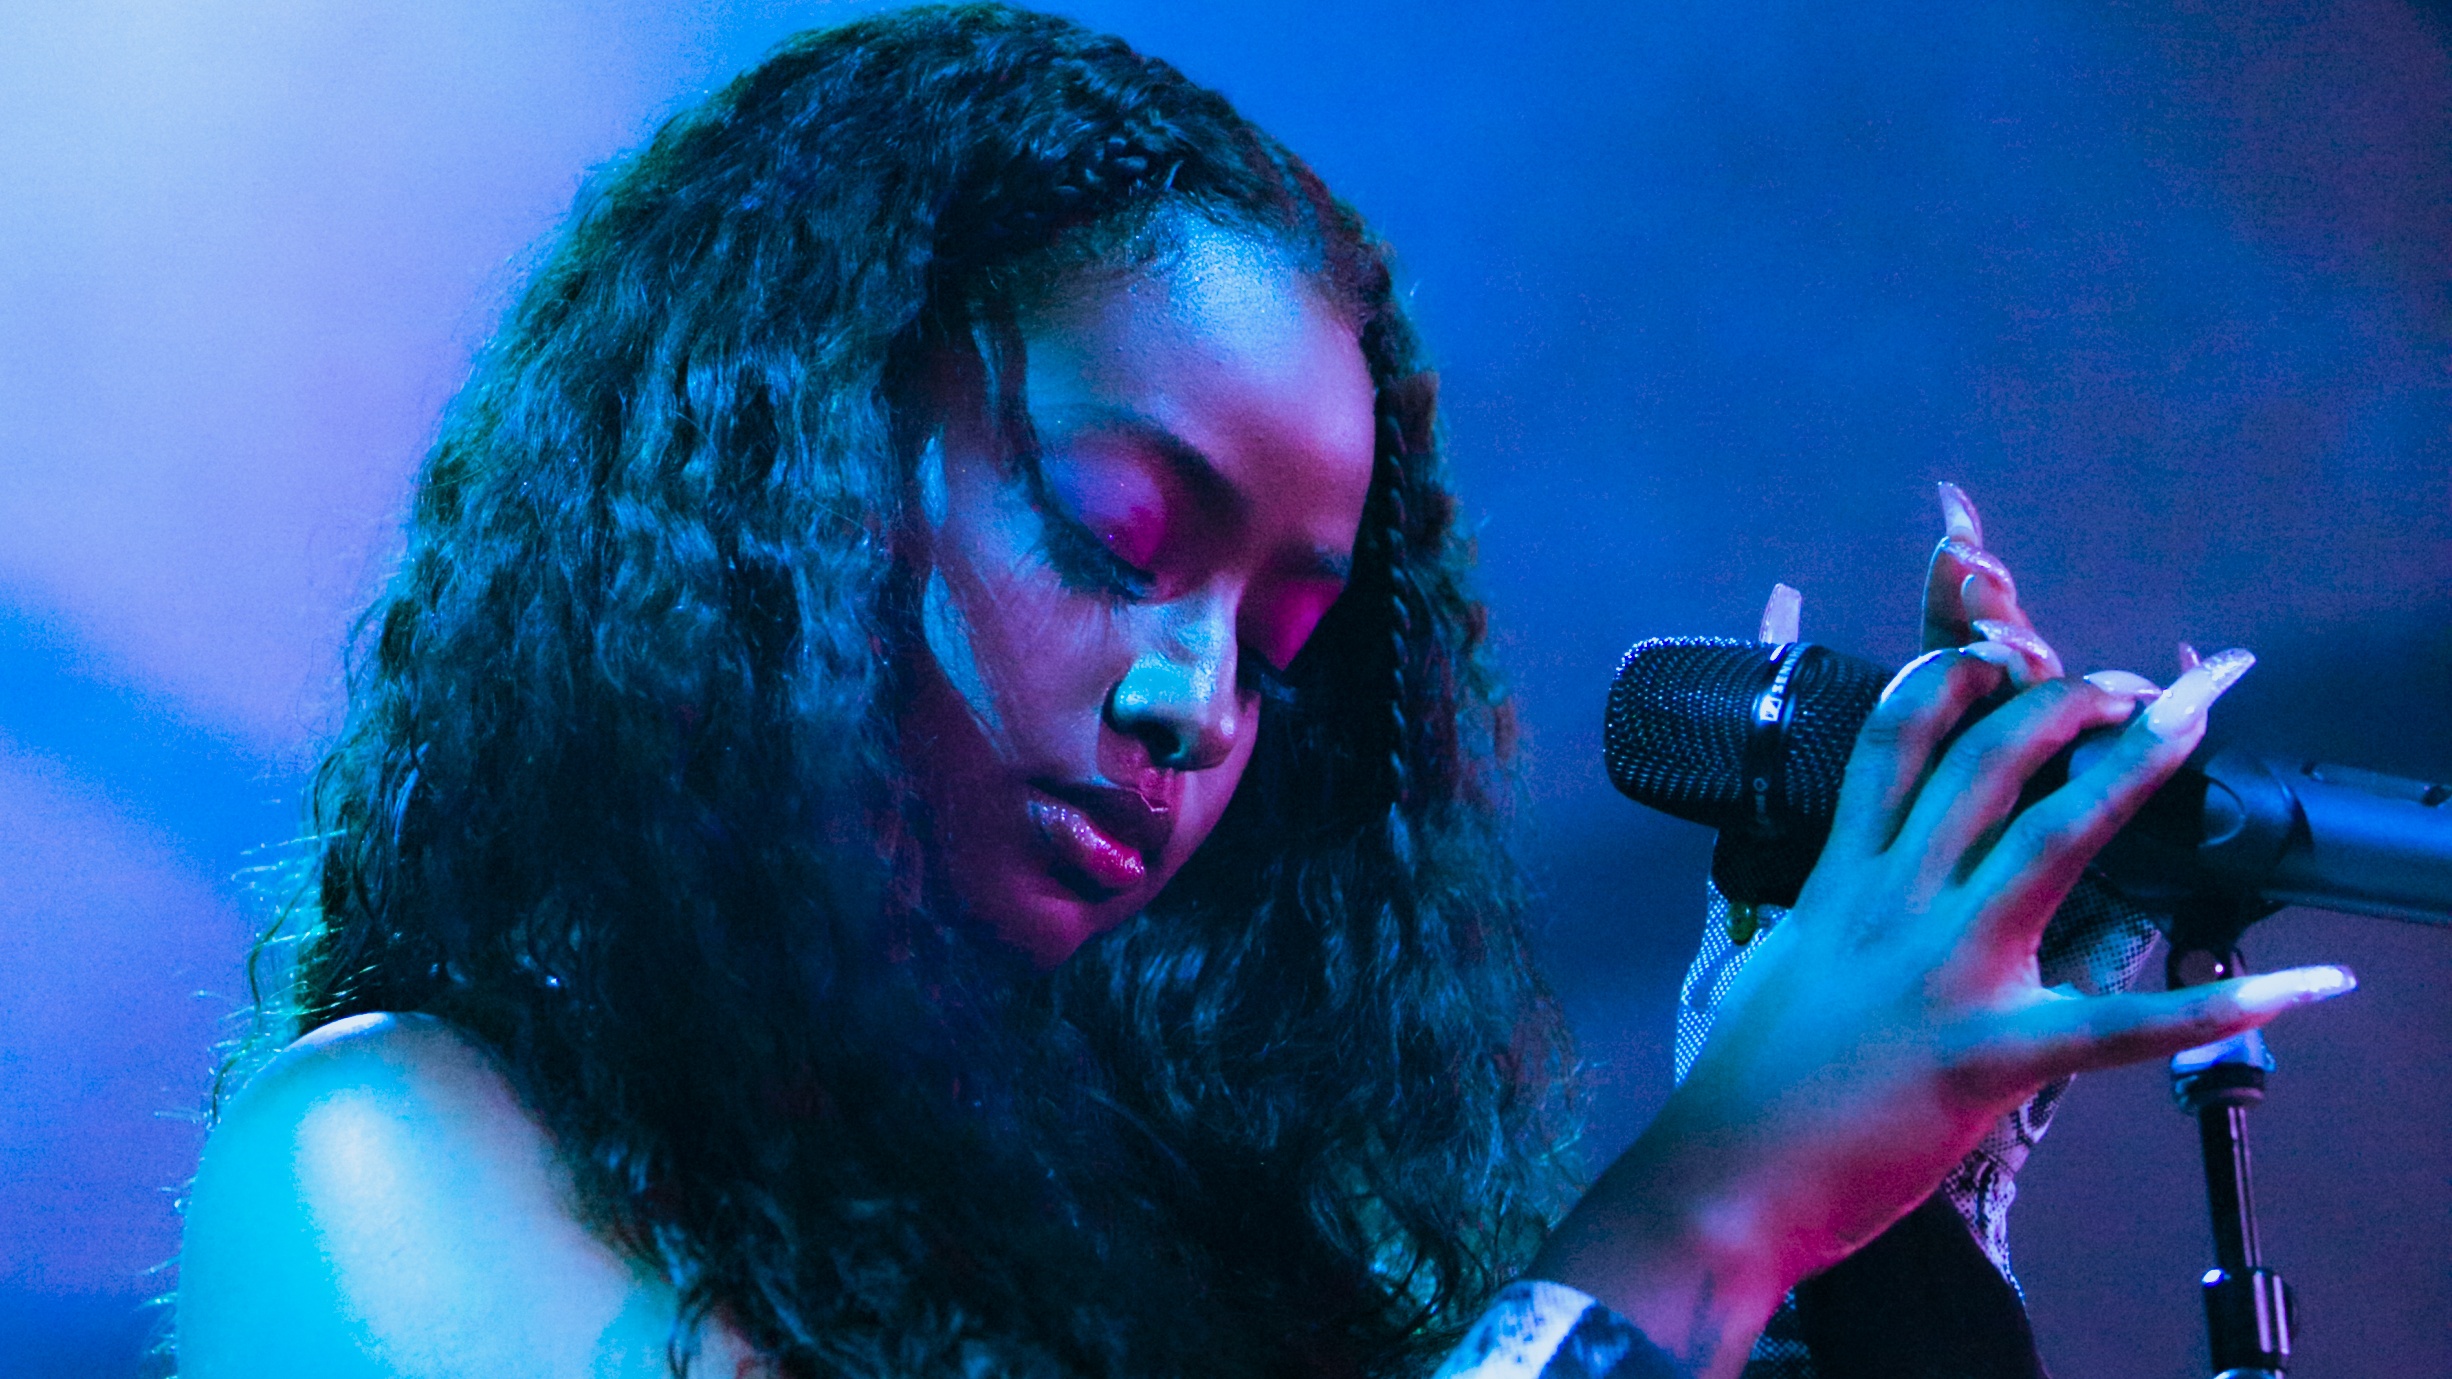 Get A First Look At Justine Skye and Saweetie’s Live Performances In Brooklyn